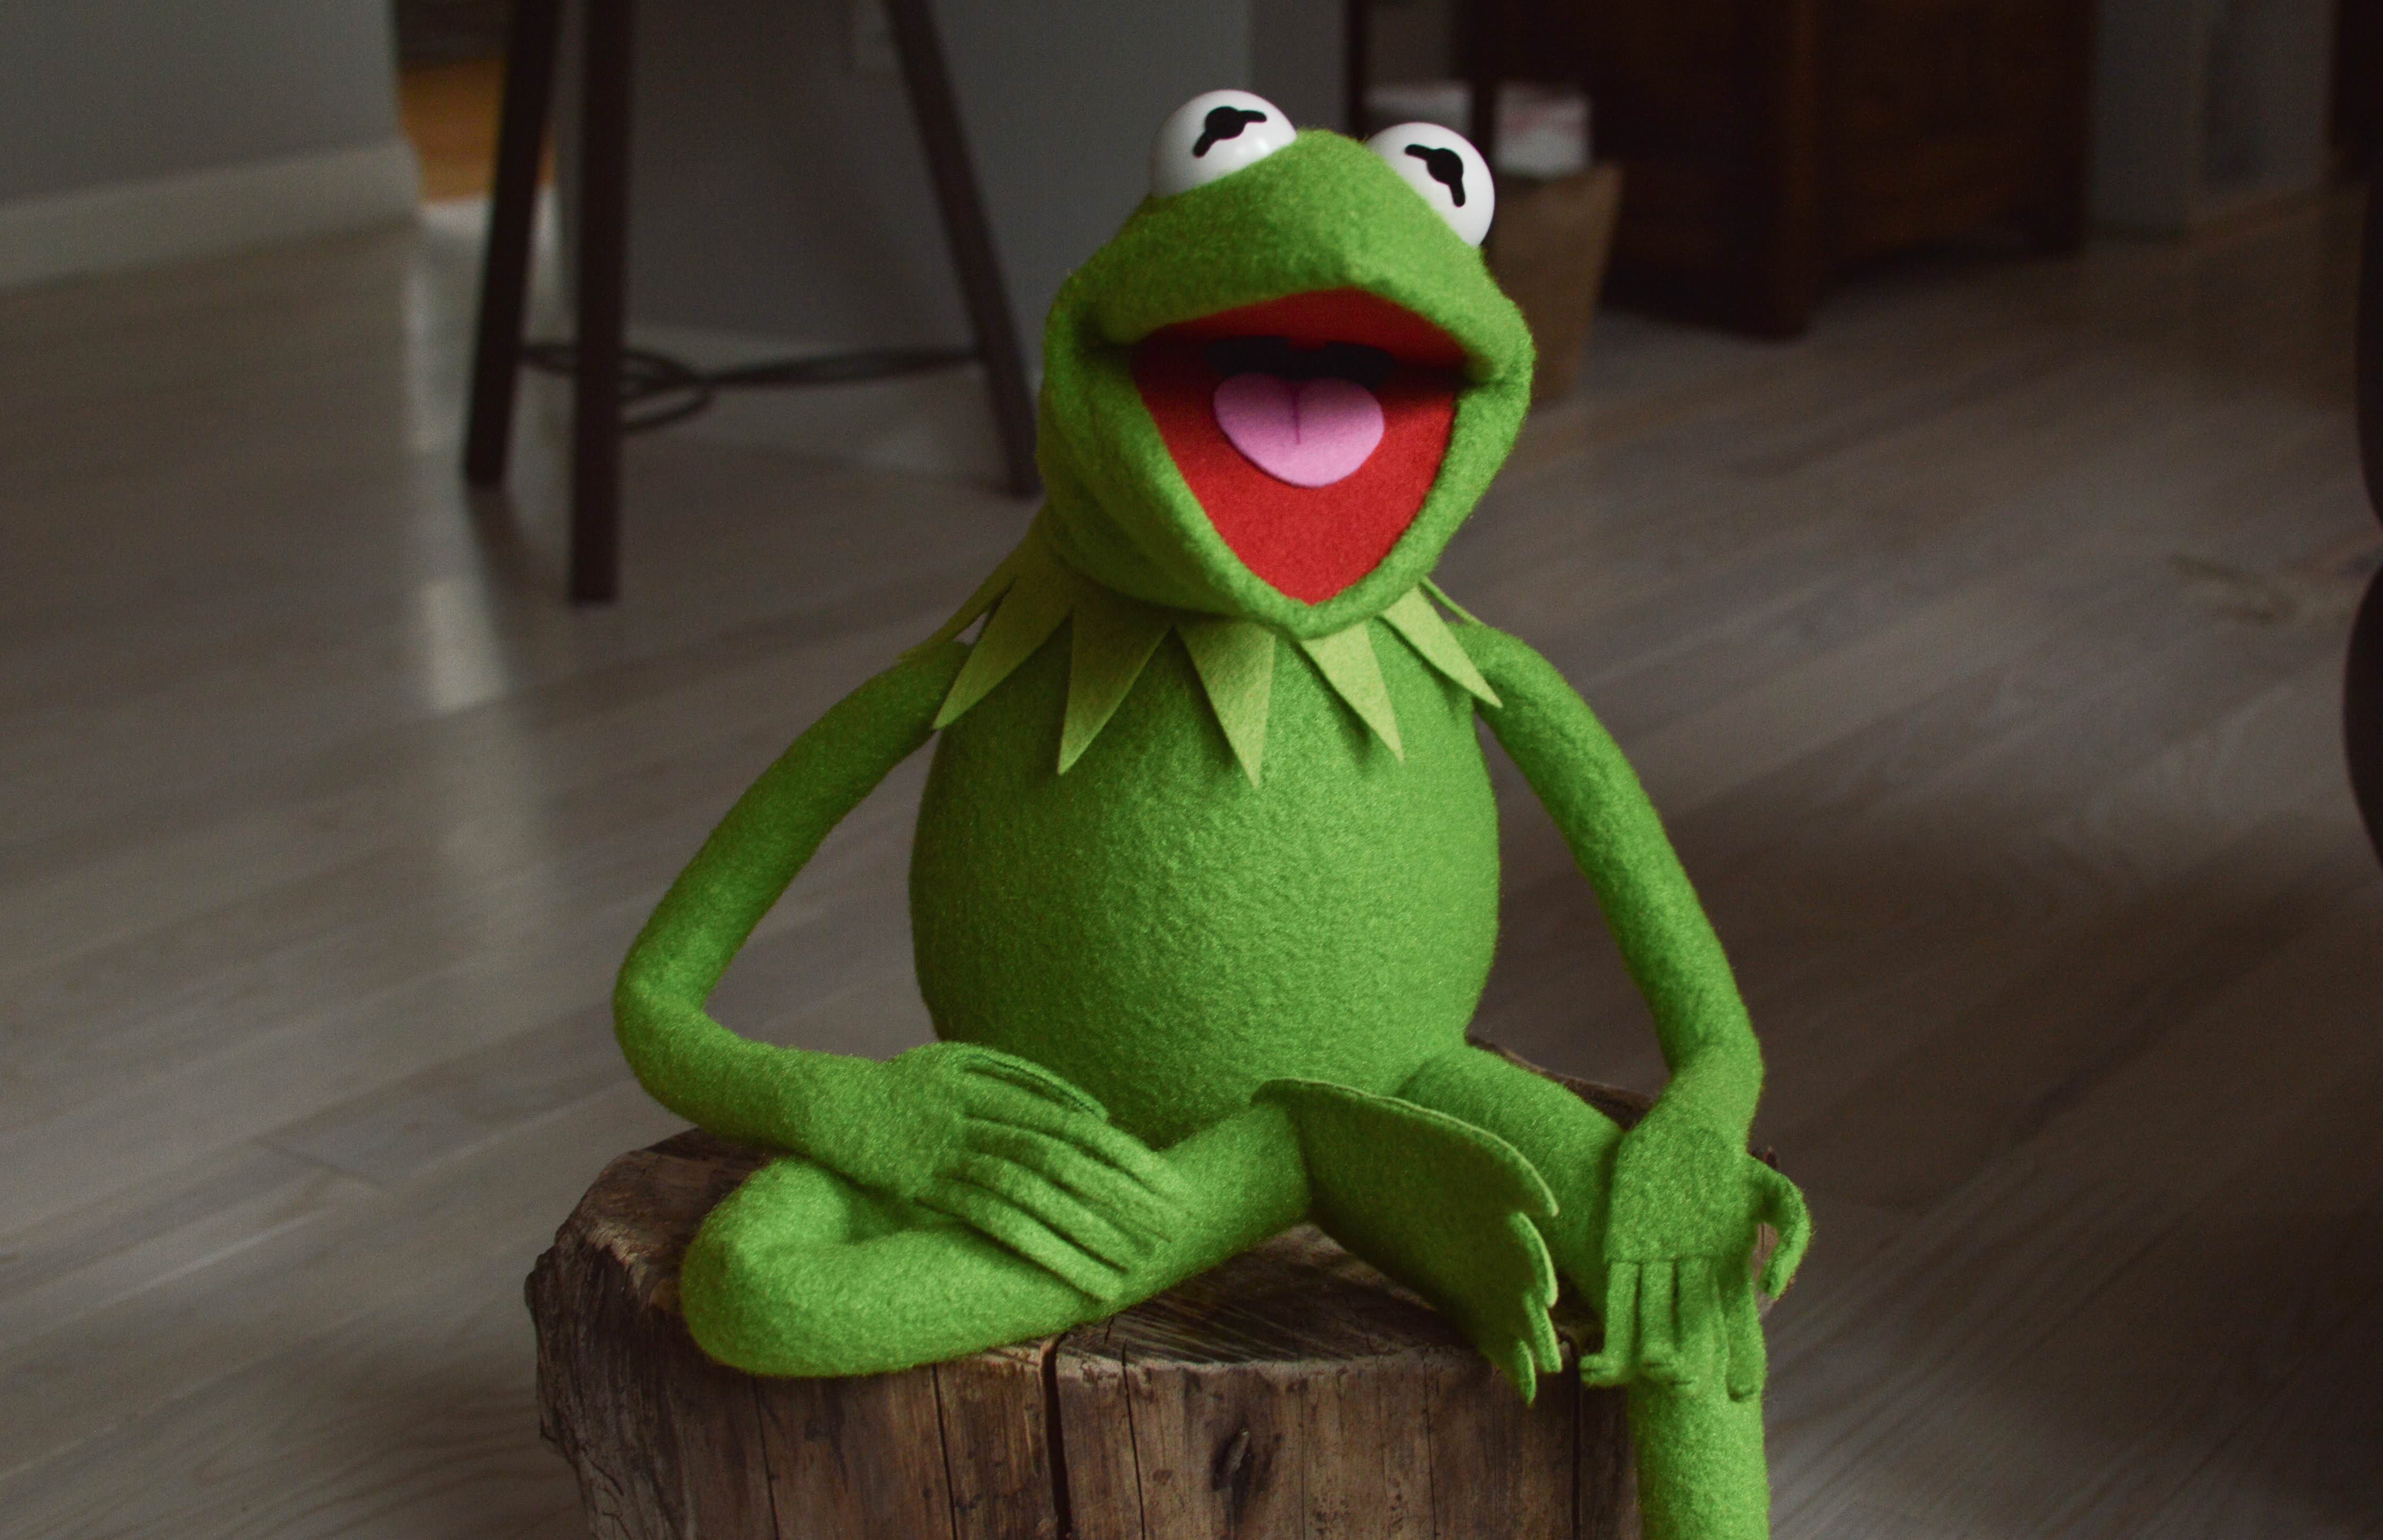 Re: ecl's Kermit the Frog Puppet Replica, version 4,5,& 6.